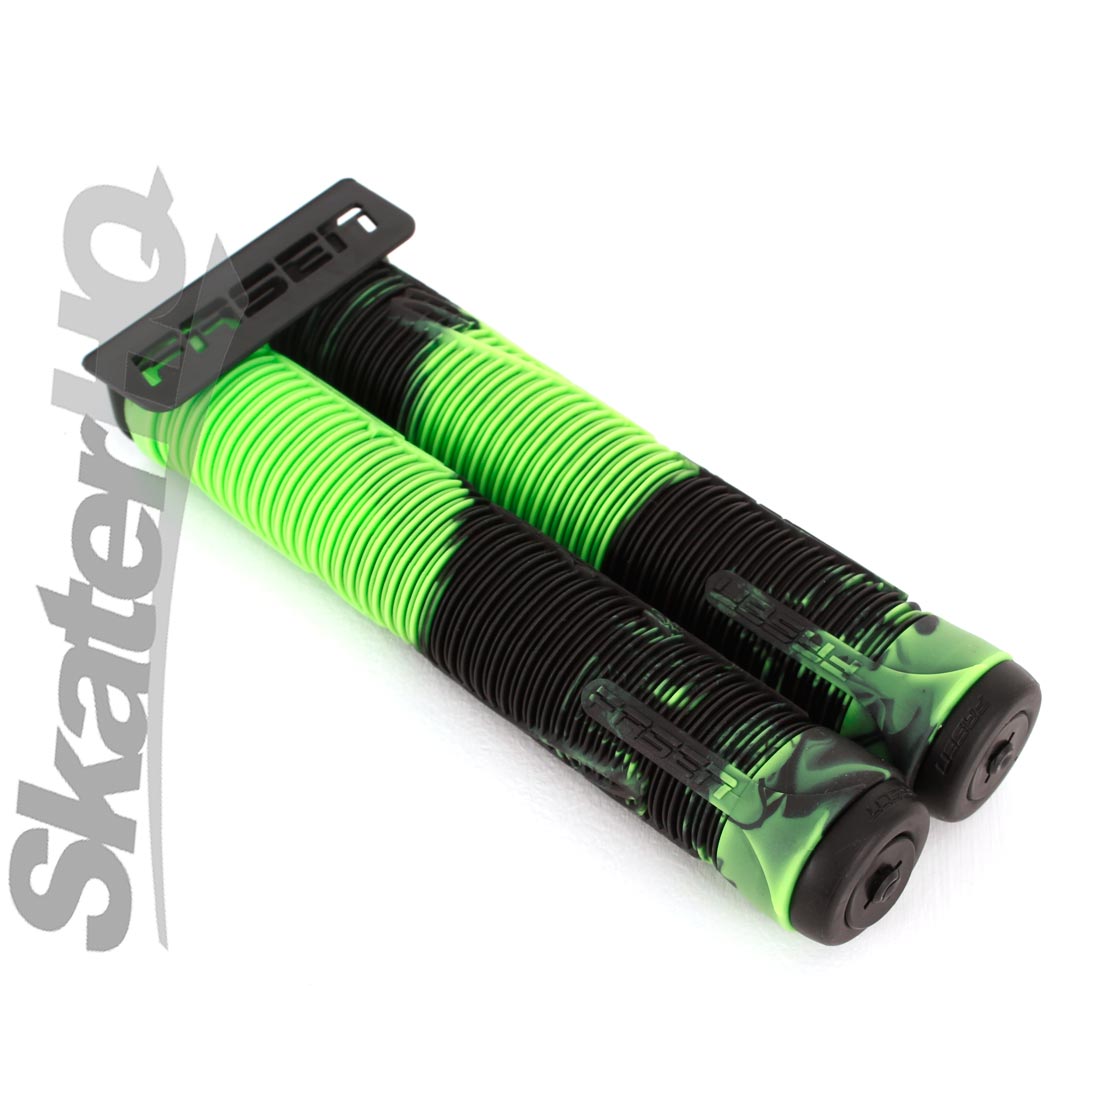 Fasen Go Fast Handle Grips - Black/Green Scooter Grips